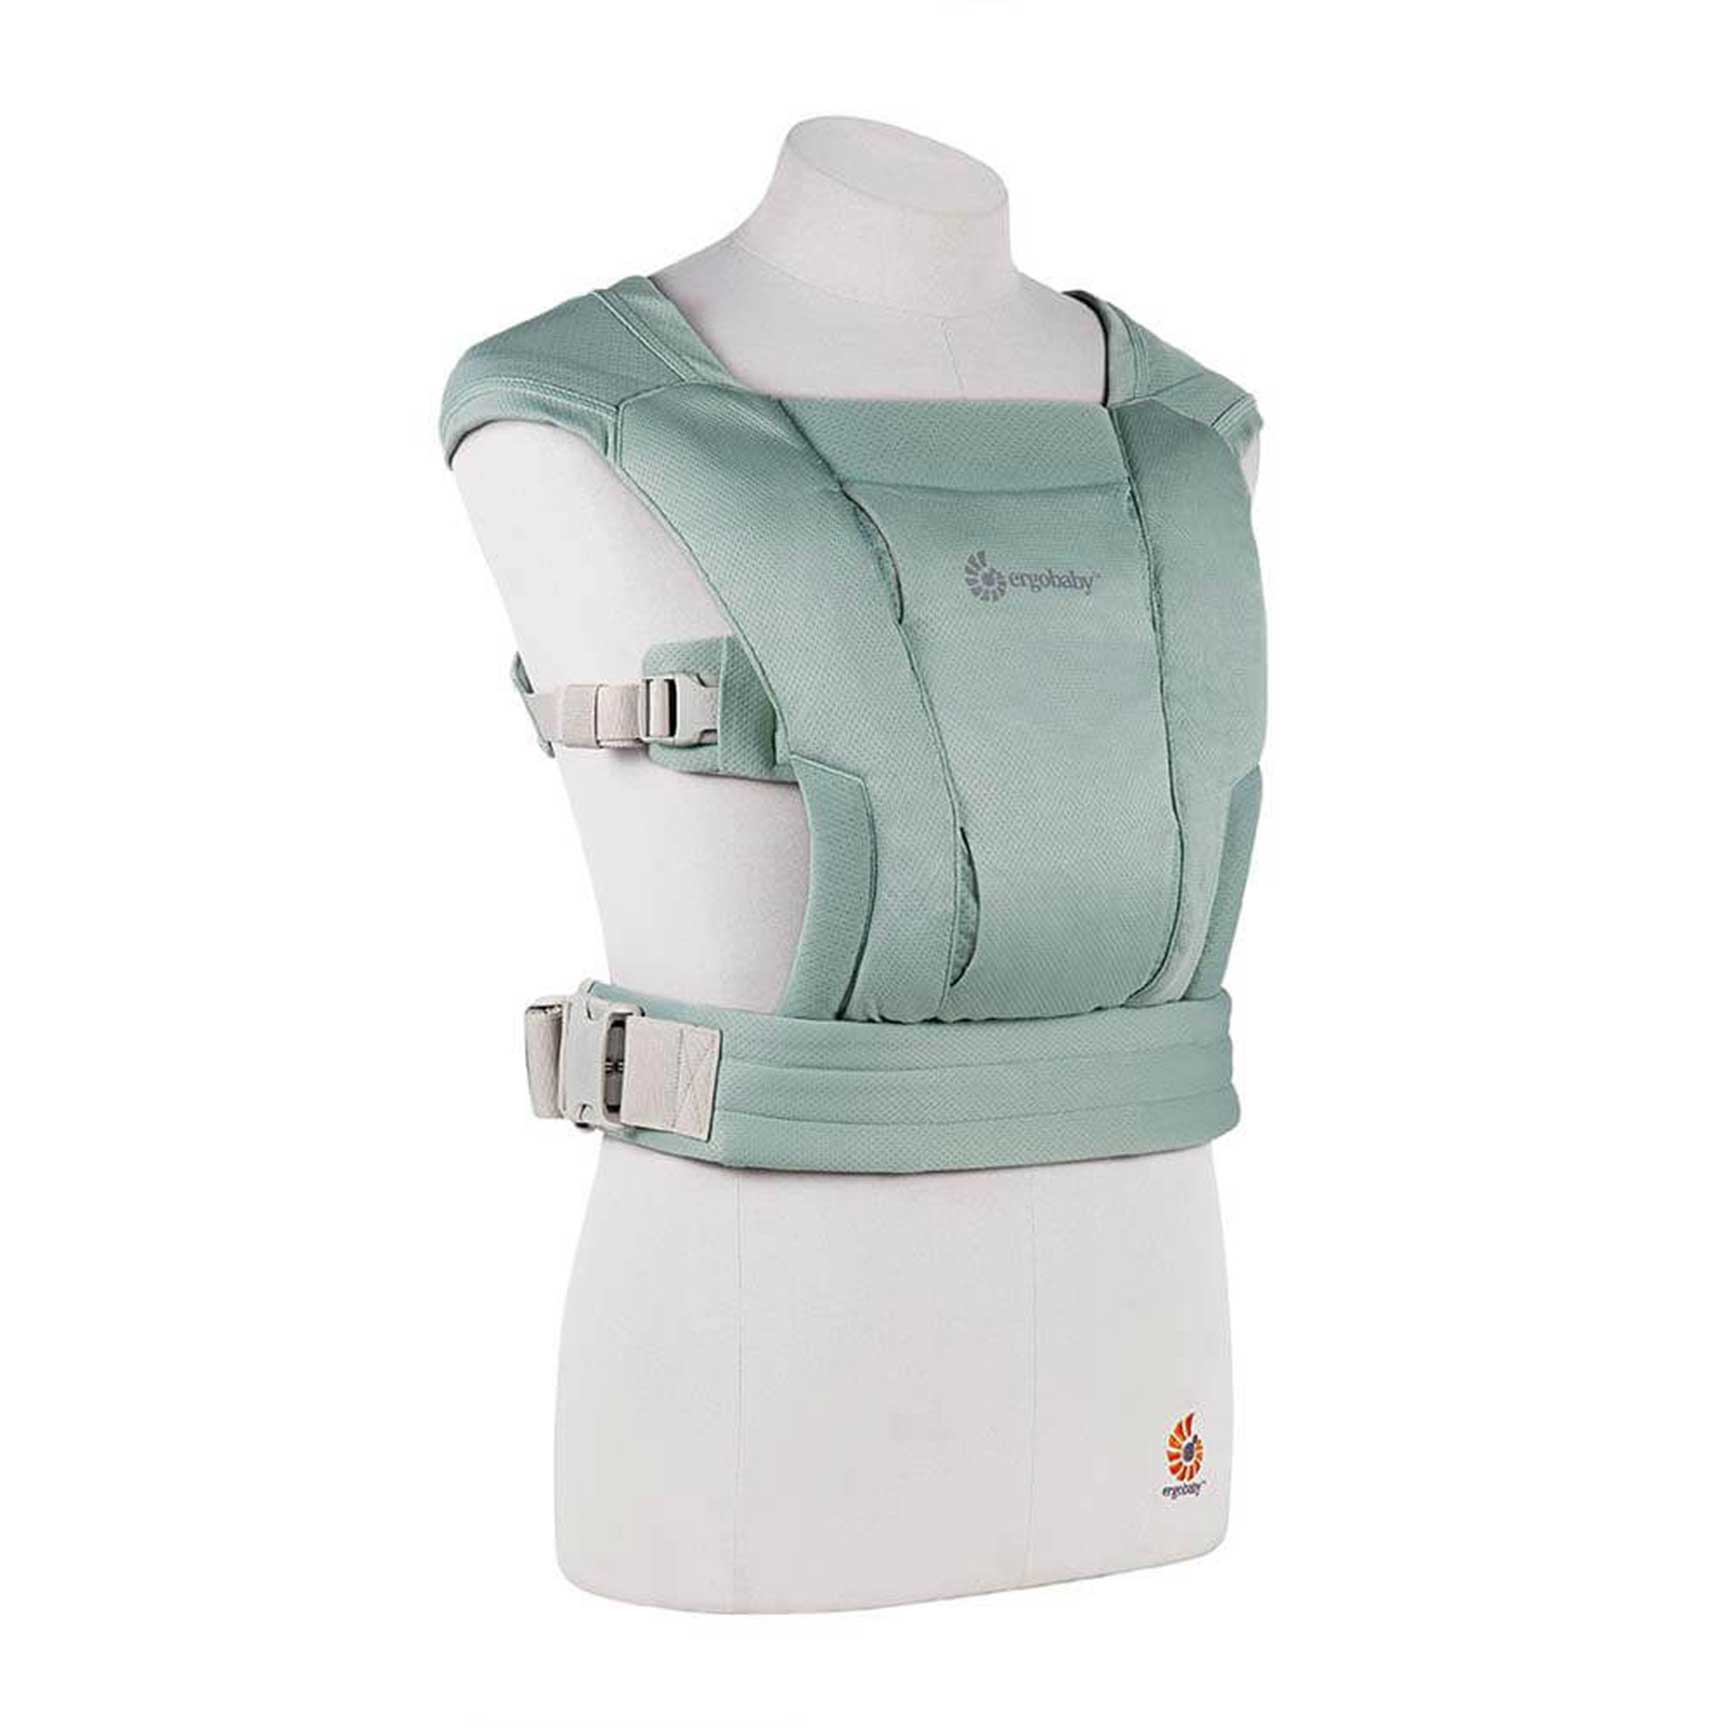 Ergobaby baby carriers Ergobaby Embrace Soft Air Mesh - Sage BCEMASAMSGE